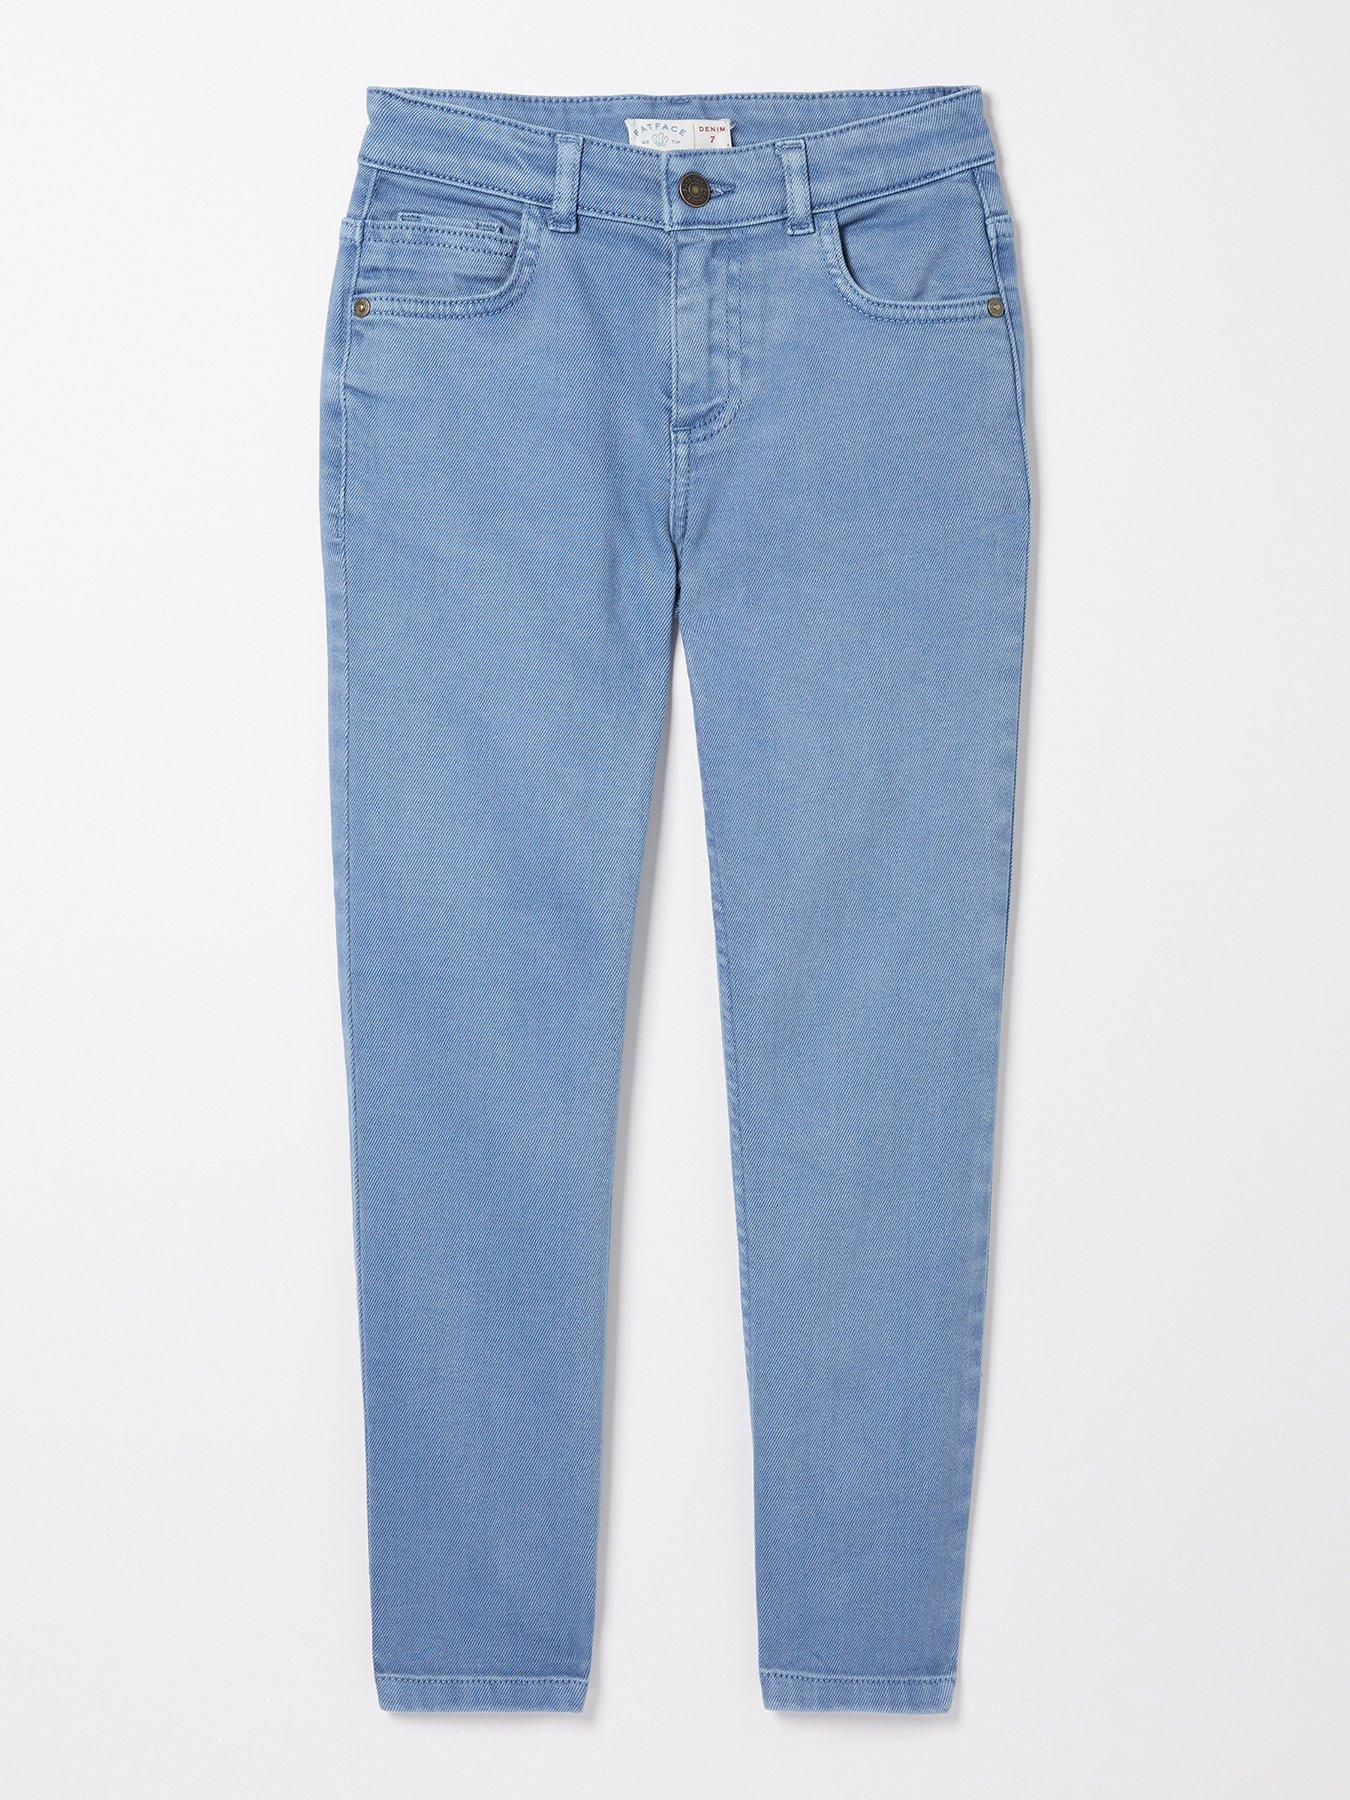 Womens Jeans and Trousers Sale - FatFace UK